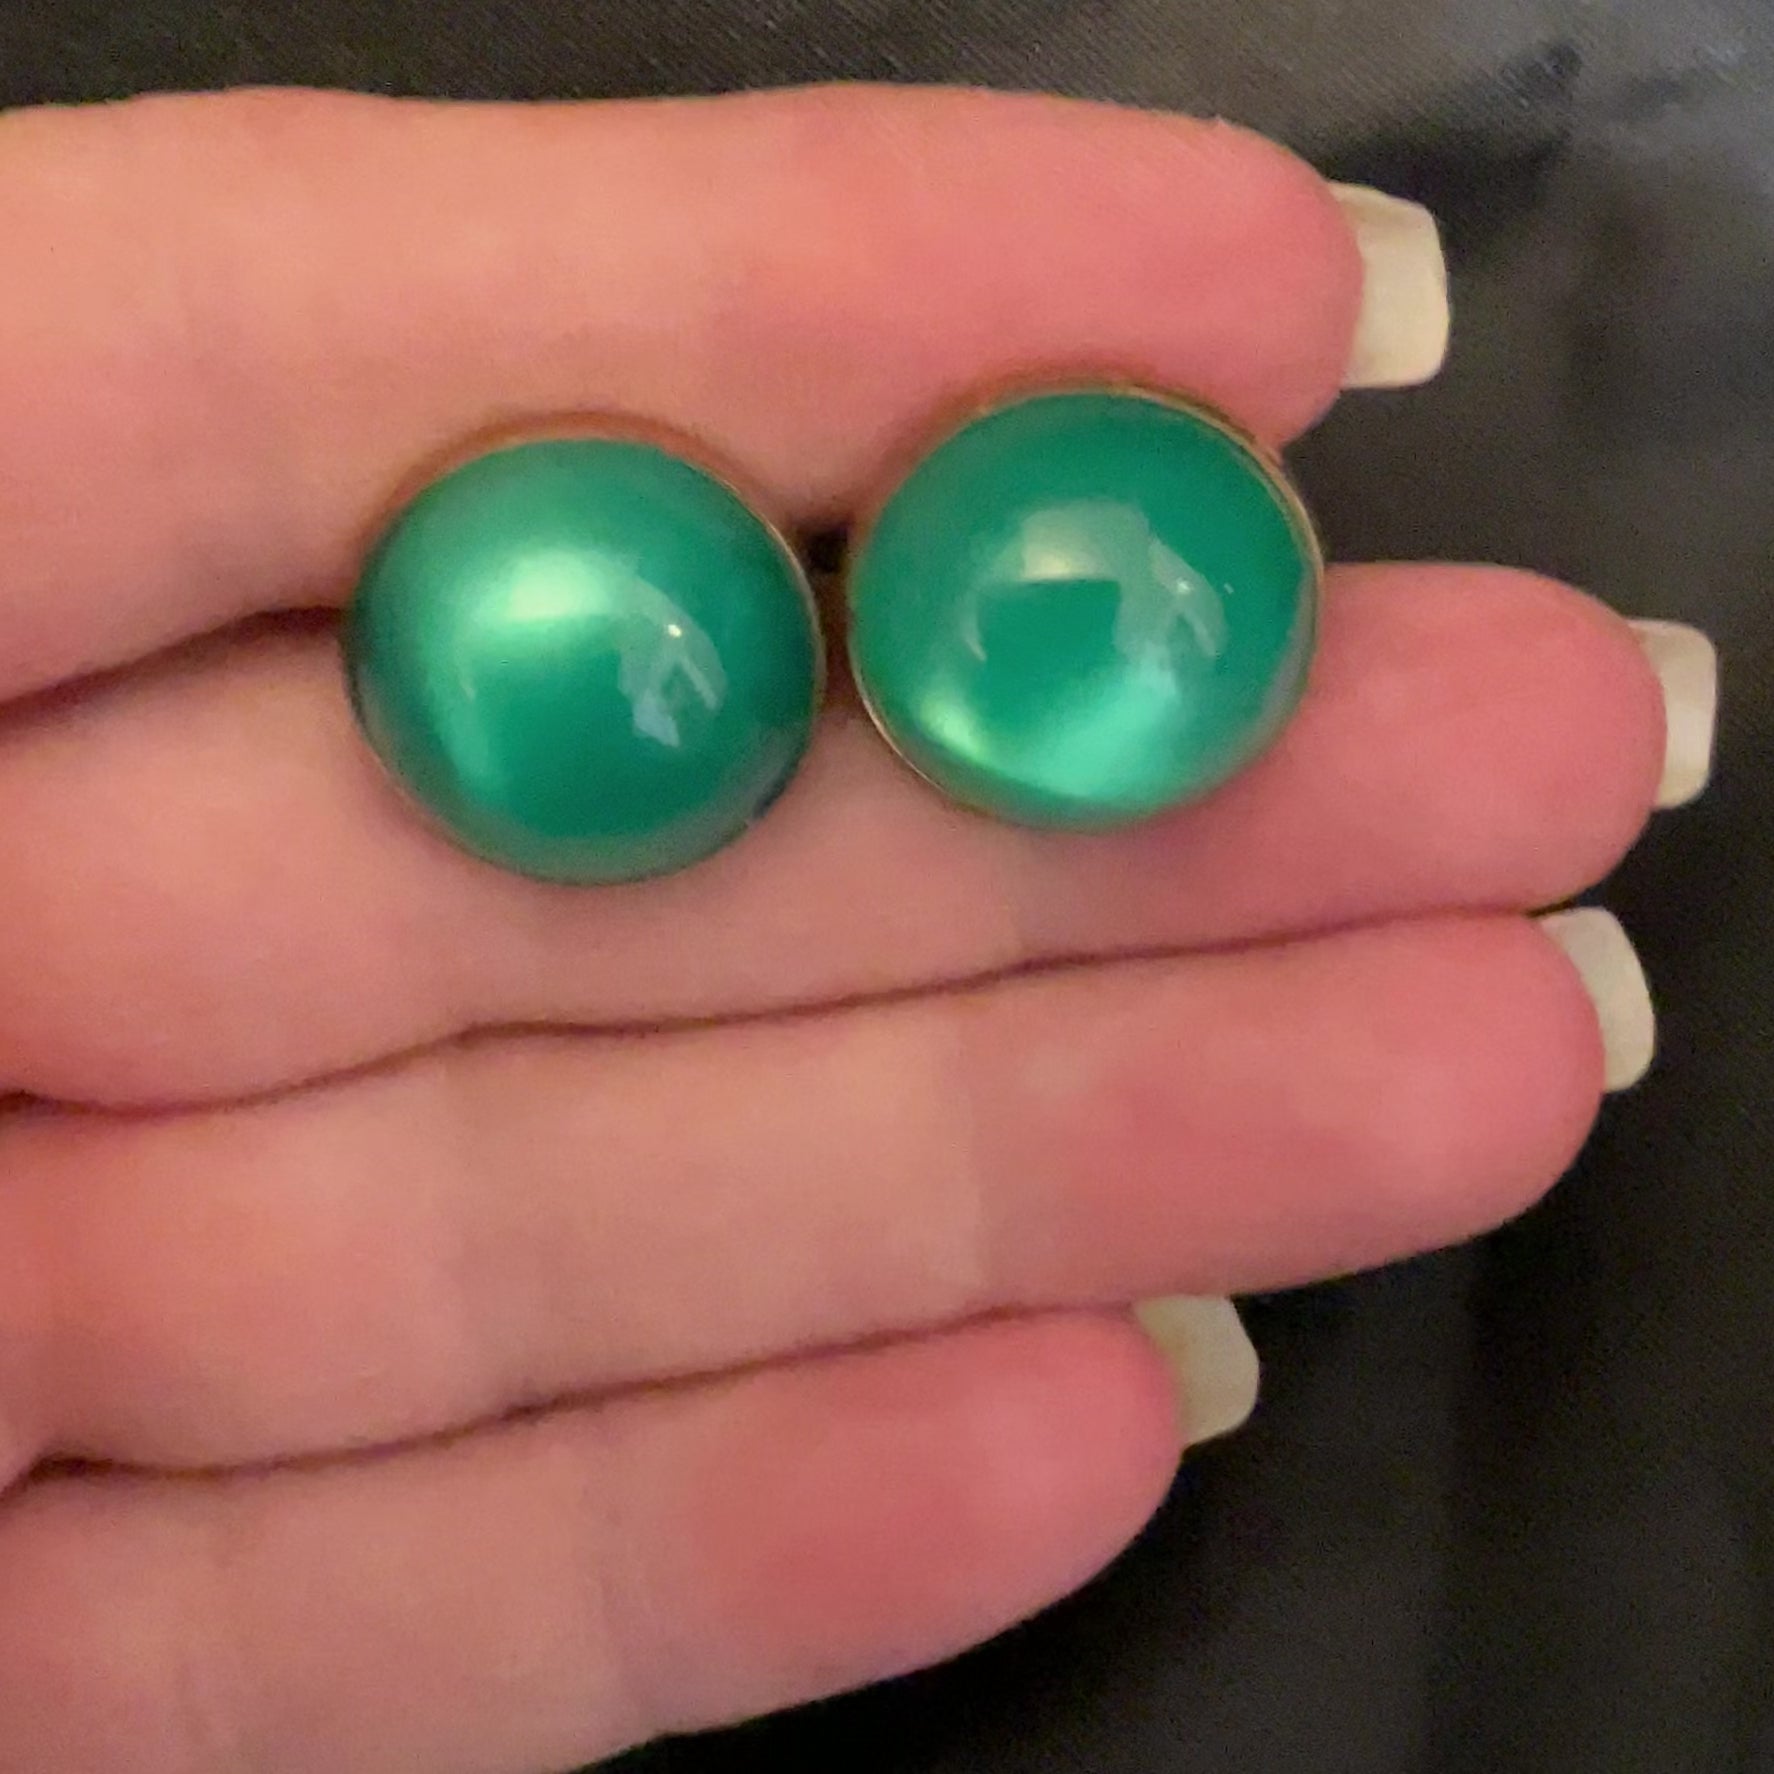 Video of the Mid Century vintage green moonglow lucite cufflinks showing how they have an inner glow like appearance when the light hits them.